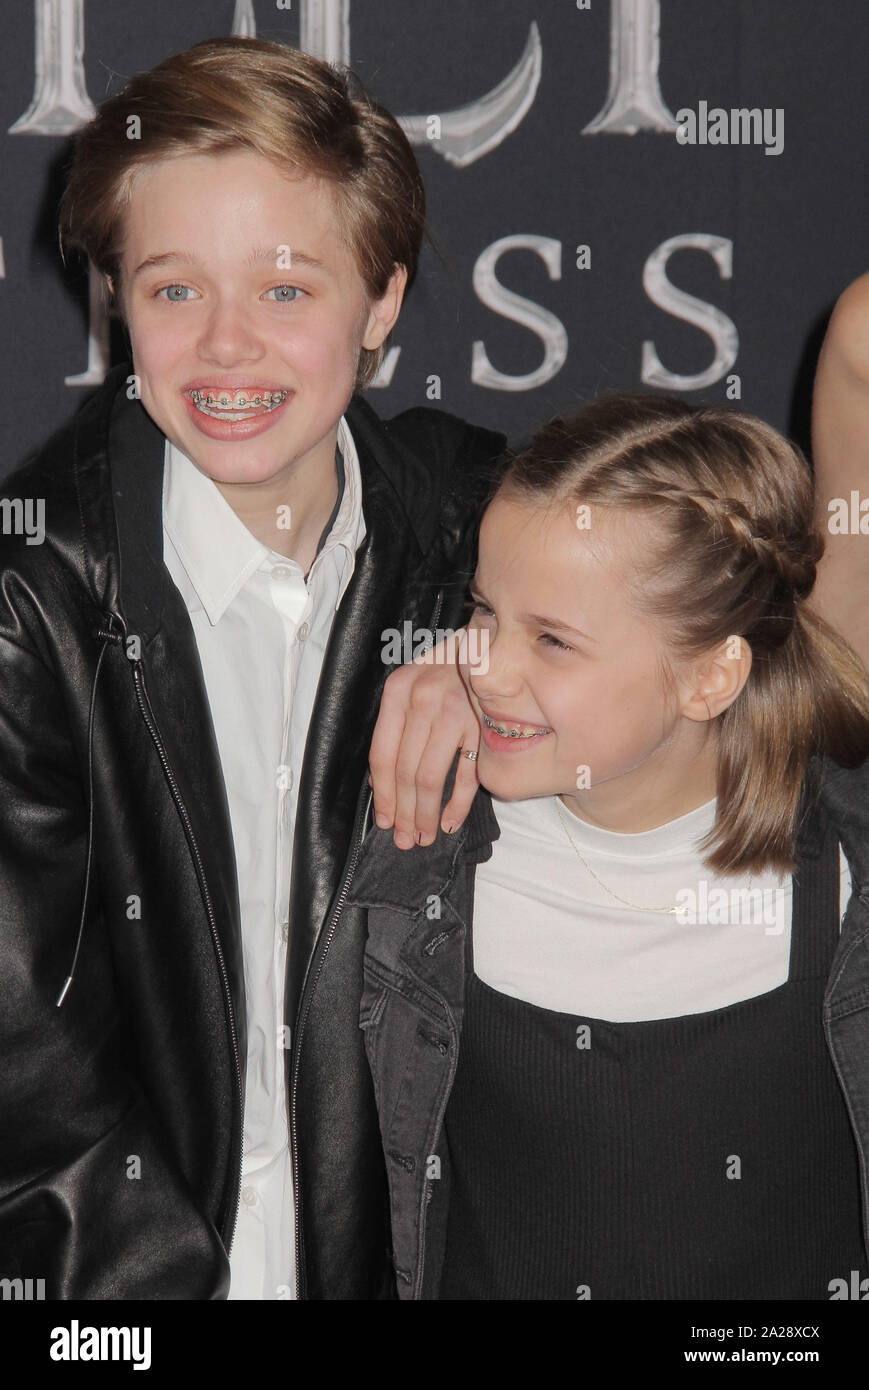 Shiloh Nouvel Jolie-Pitt, Vivienne Marcheline Jolie-Pitt  09/30/2019 The World Premiere of 'Maleficent: Mistress of Evil' held at the El CapitanTheatre in Los Angeles, CA. Photo by I. Hasegawa / HNW/PictureLux Stock Photo